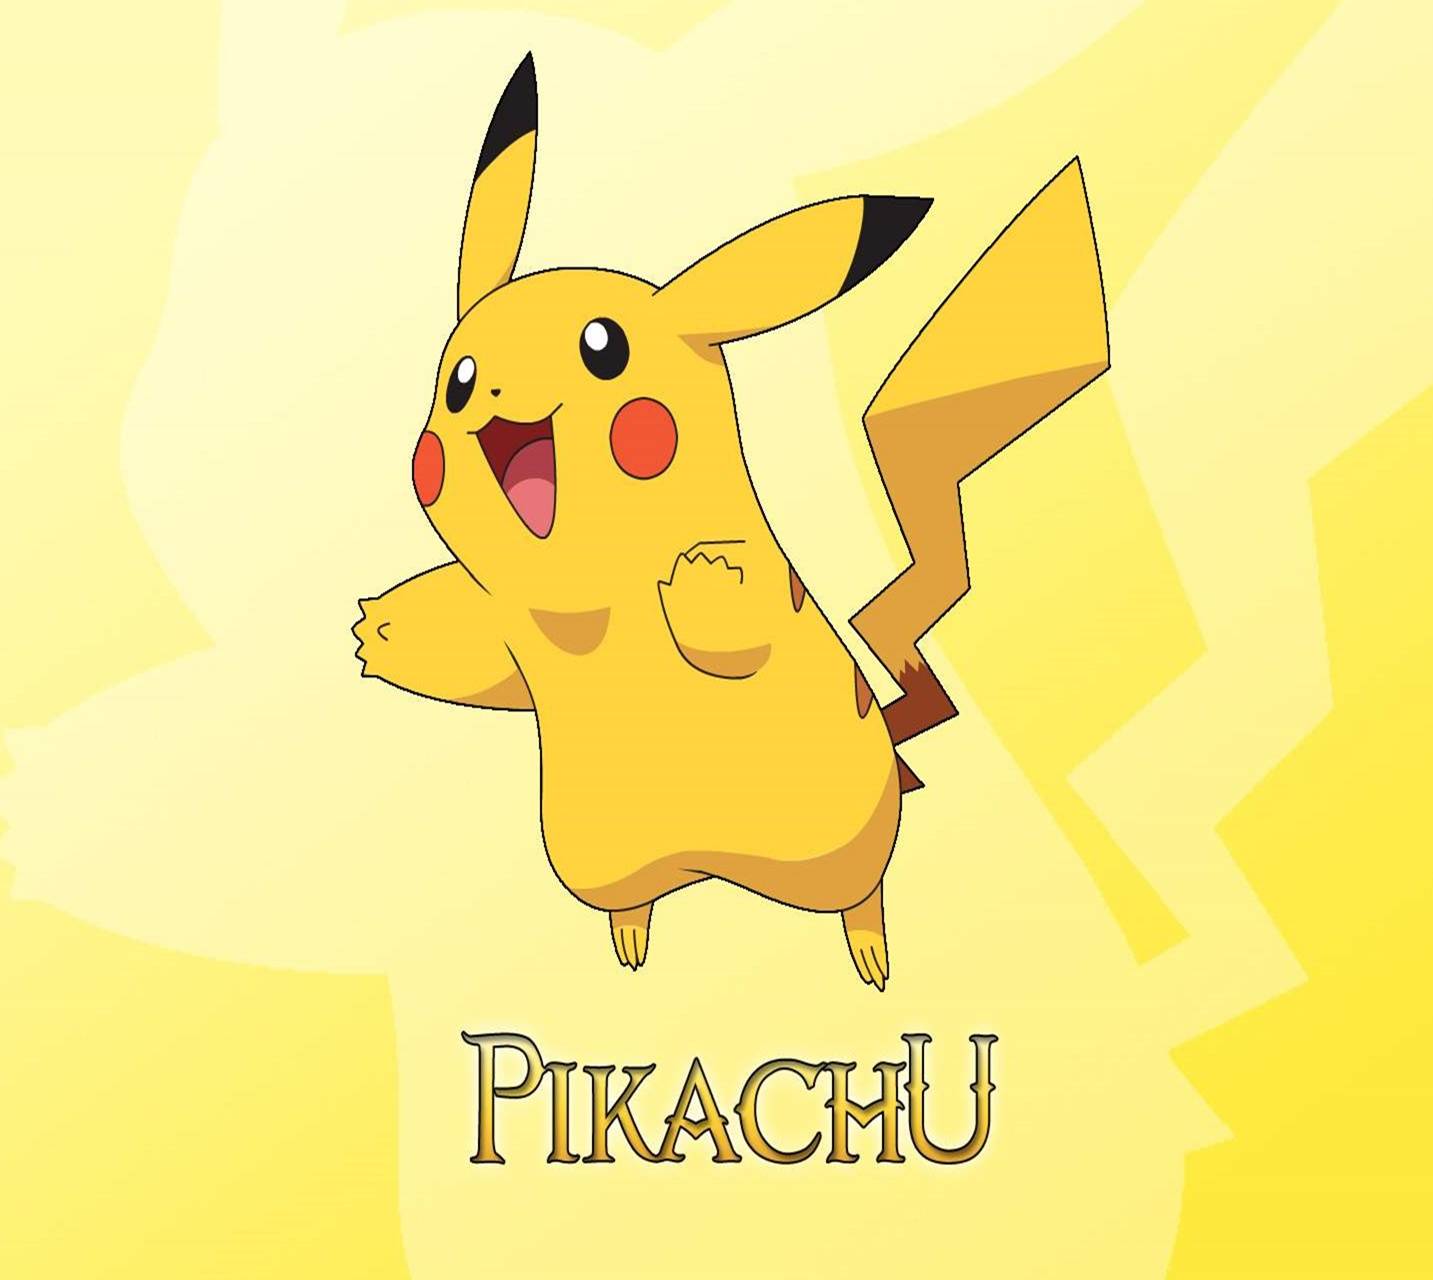 Download free pikachu wallpaper for your mobile phone